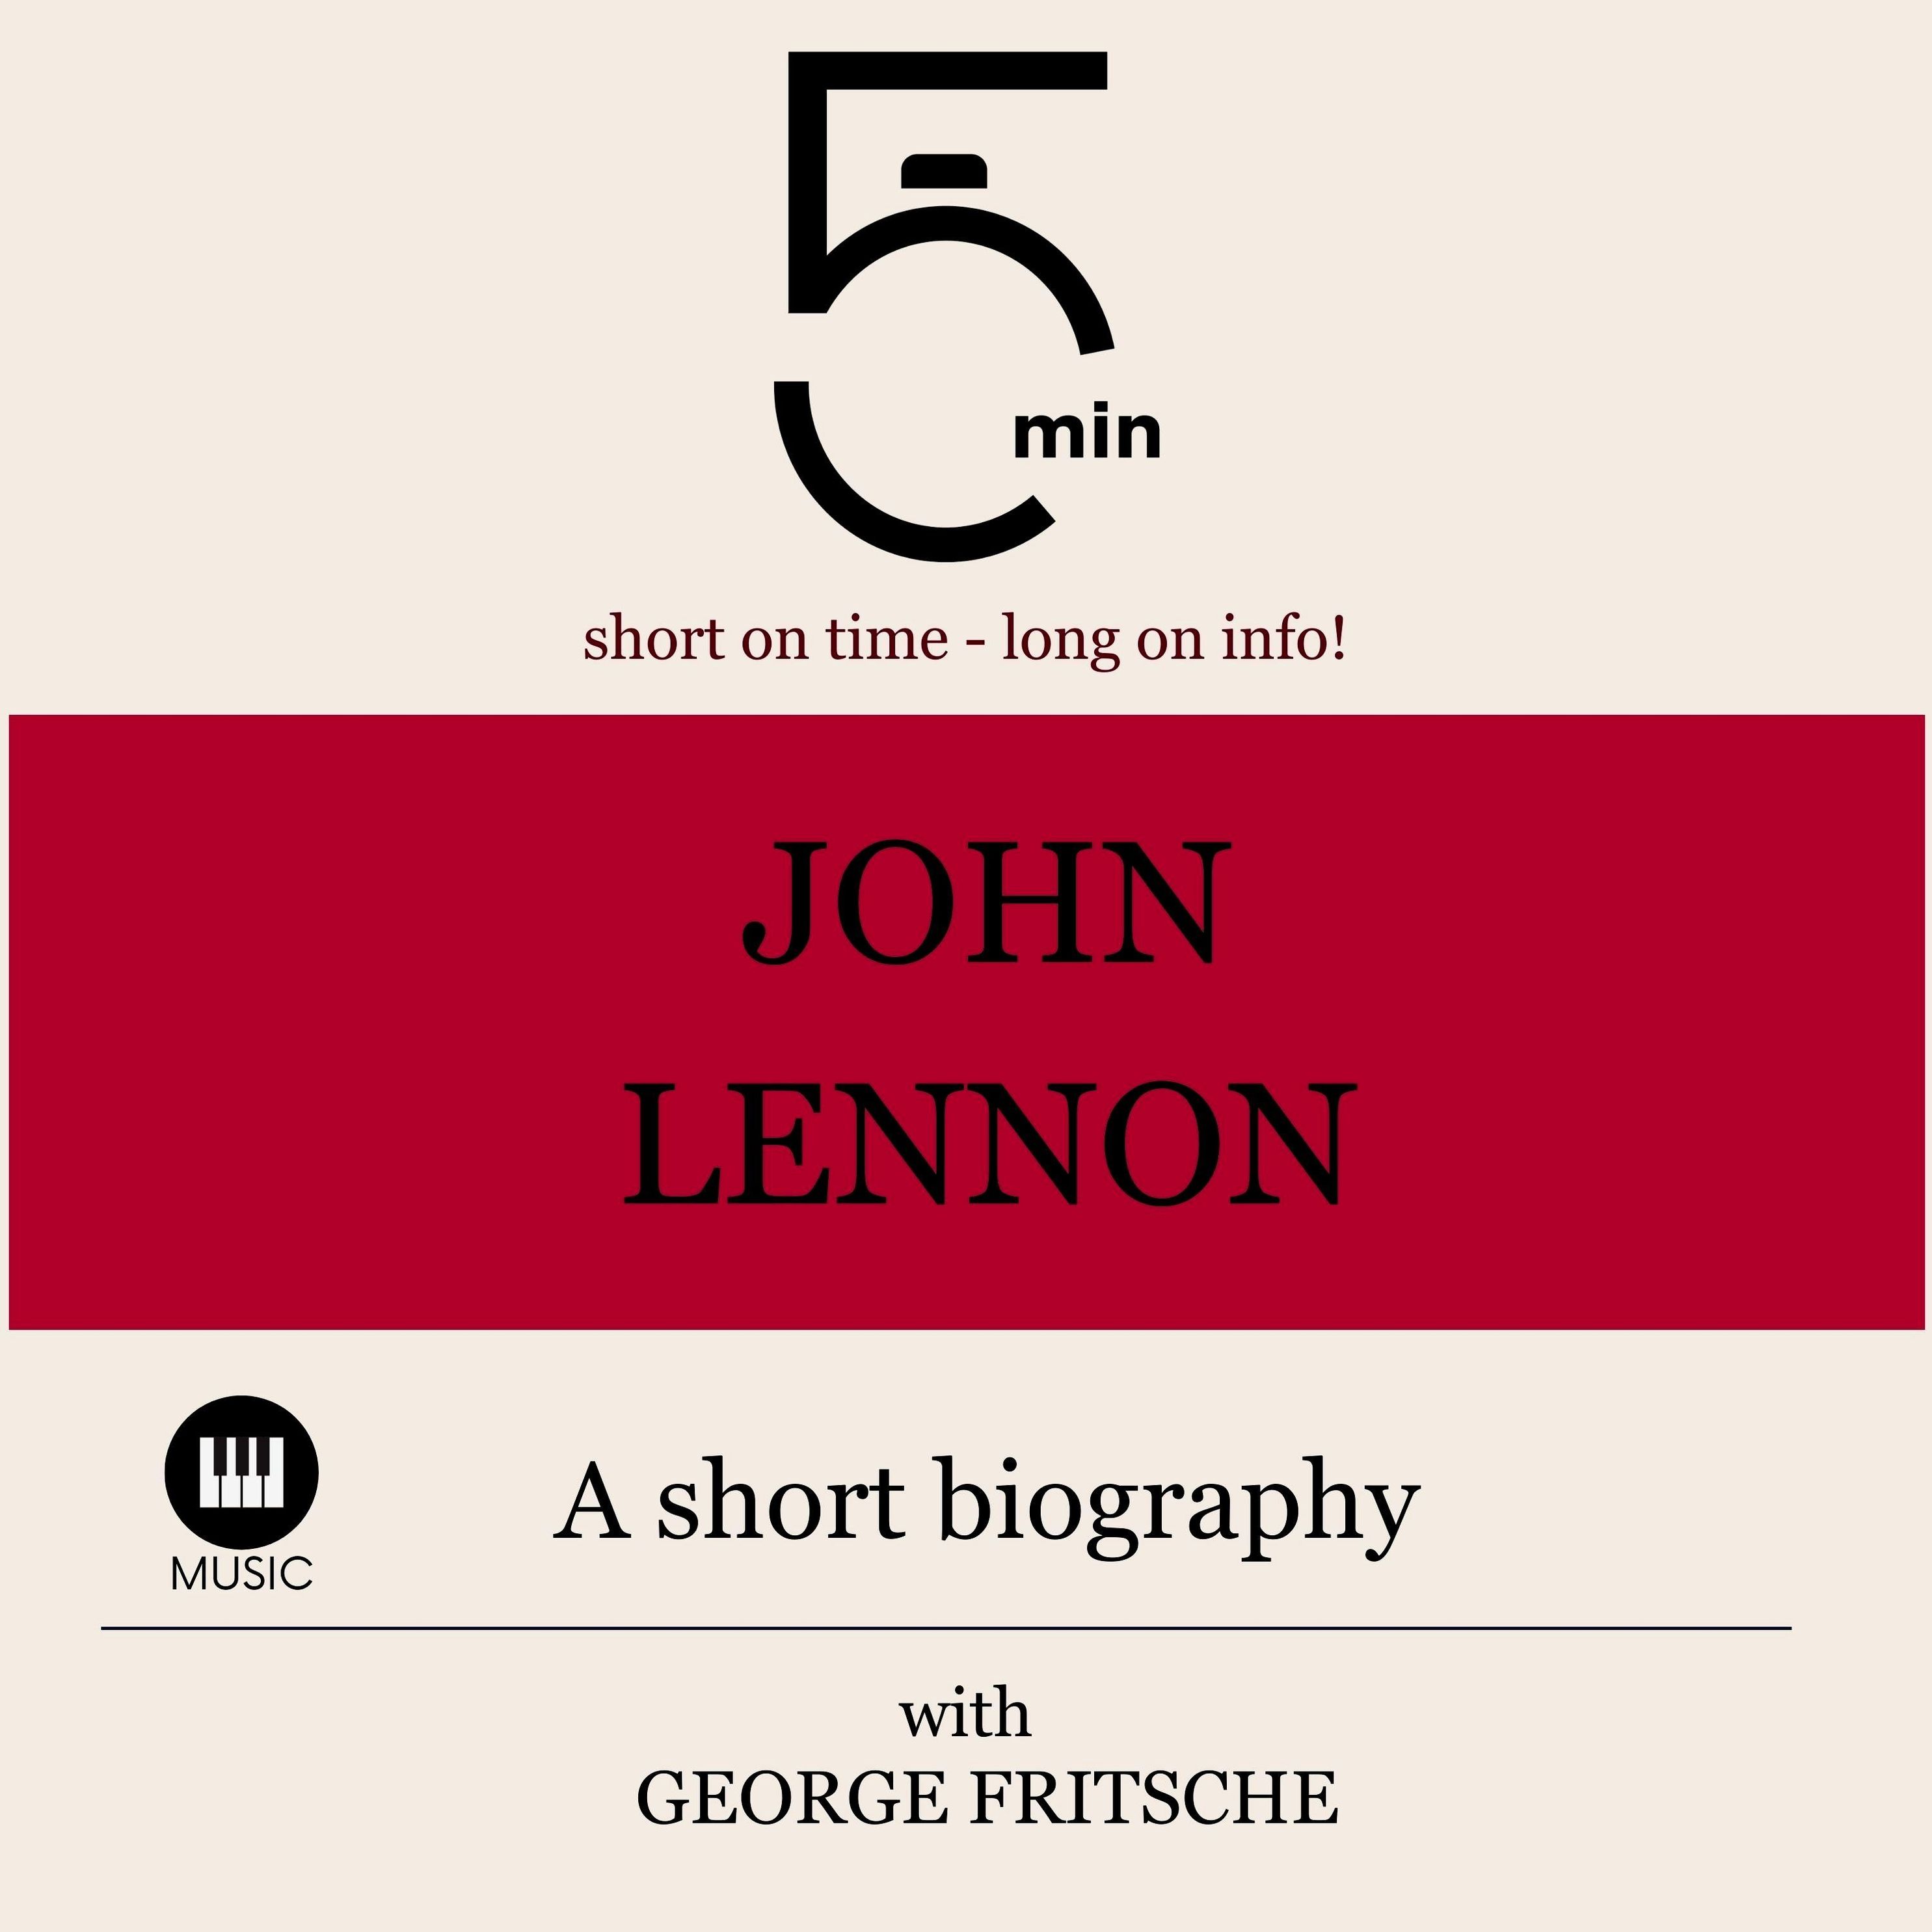 5 Minute Biographies - John Lennon: A short biography Hörbuch Download